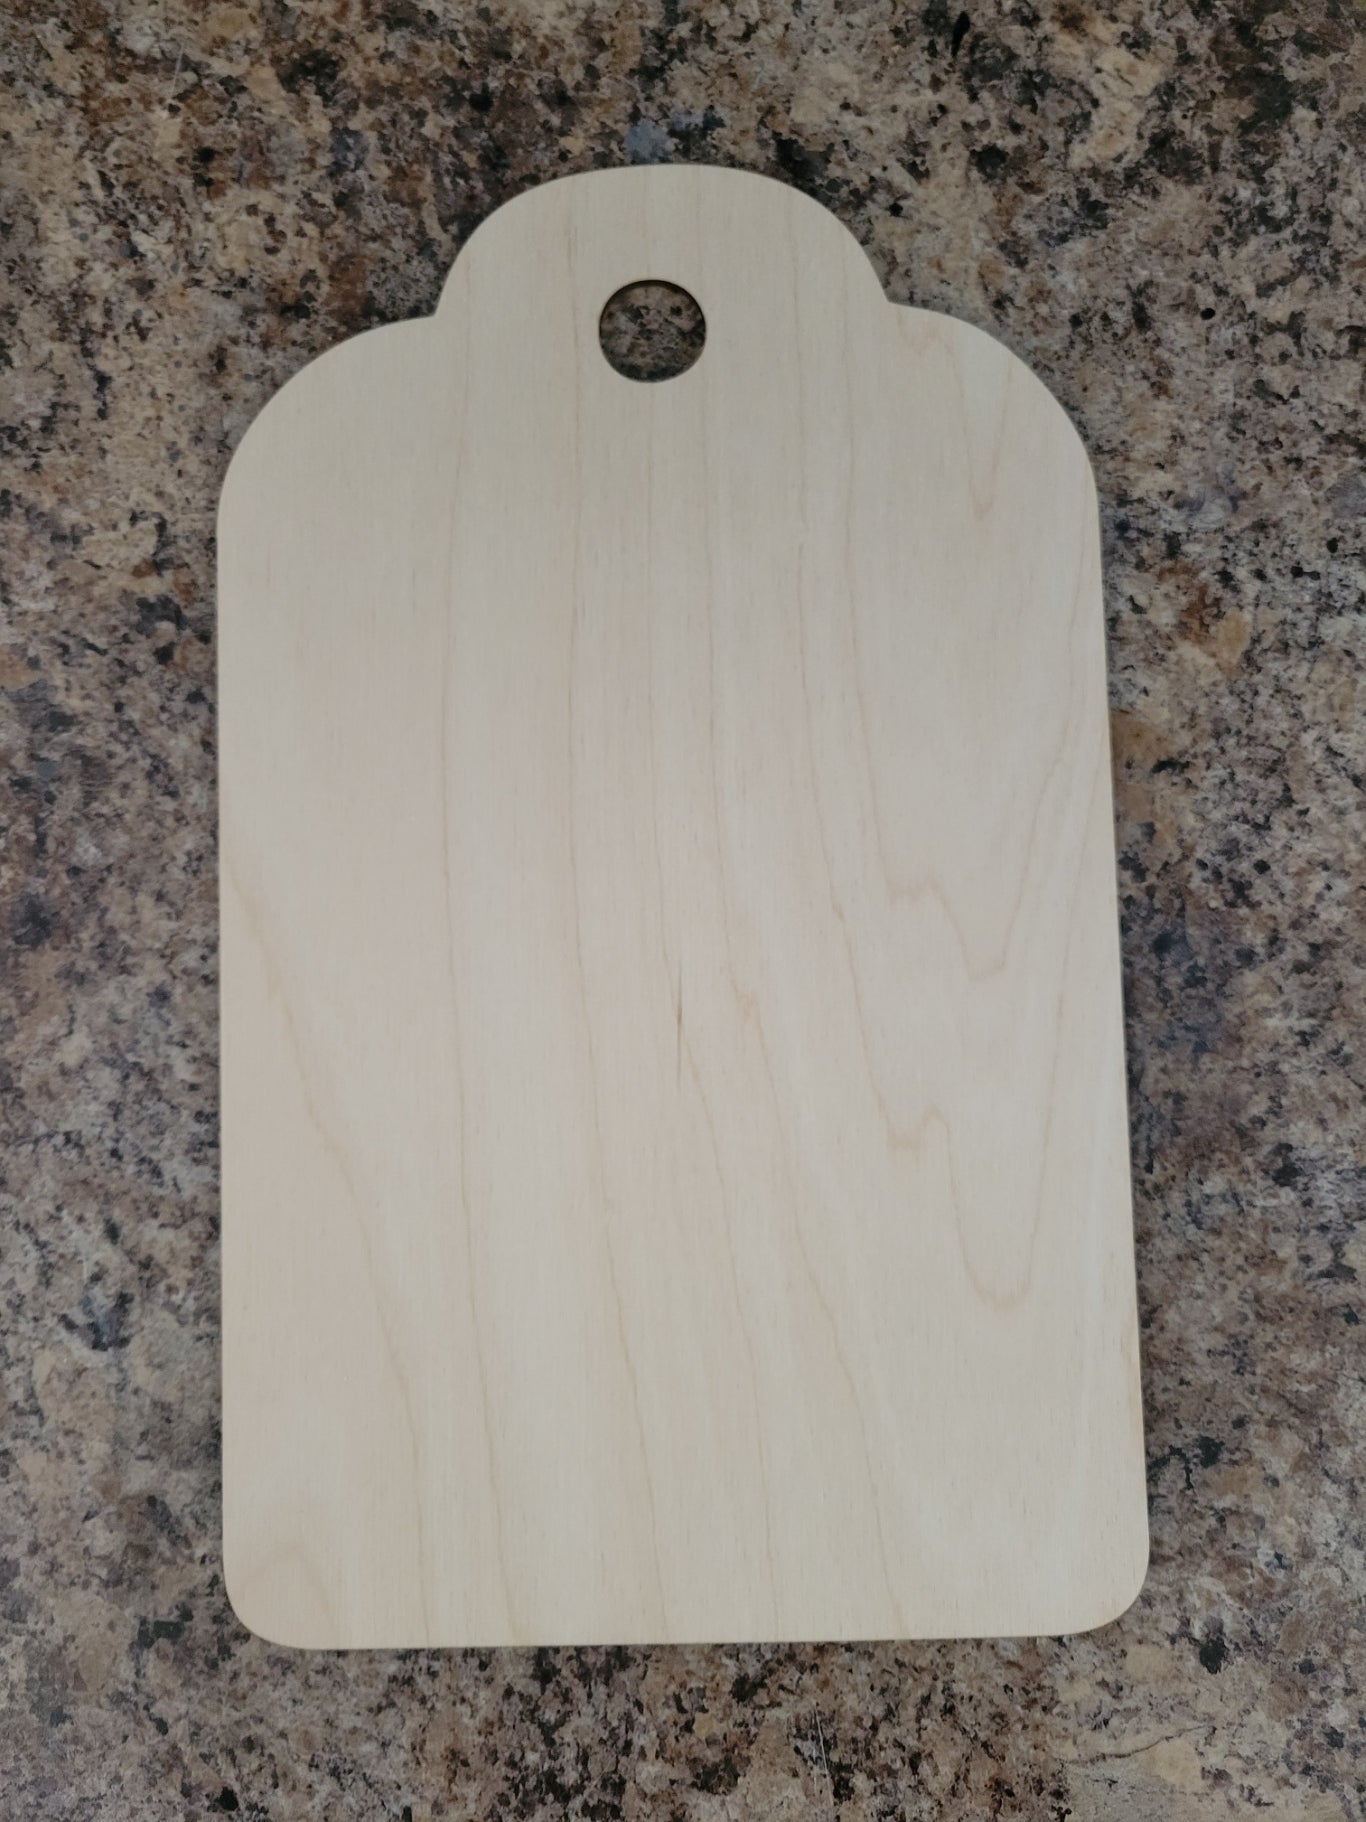 wooden door hangers  wooden door hanger  Wooden  Wood Ticket  Wood Tags  Wood Tag  Wood Signs  Wood Blanks  Wood Blank  Laser DIY  Door Tags  Door Tag  door hangers  Door Hanger  Door  Chalking  Chalker  Chalkboard  Chalk Couture